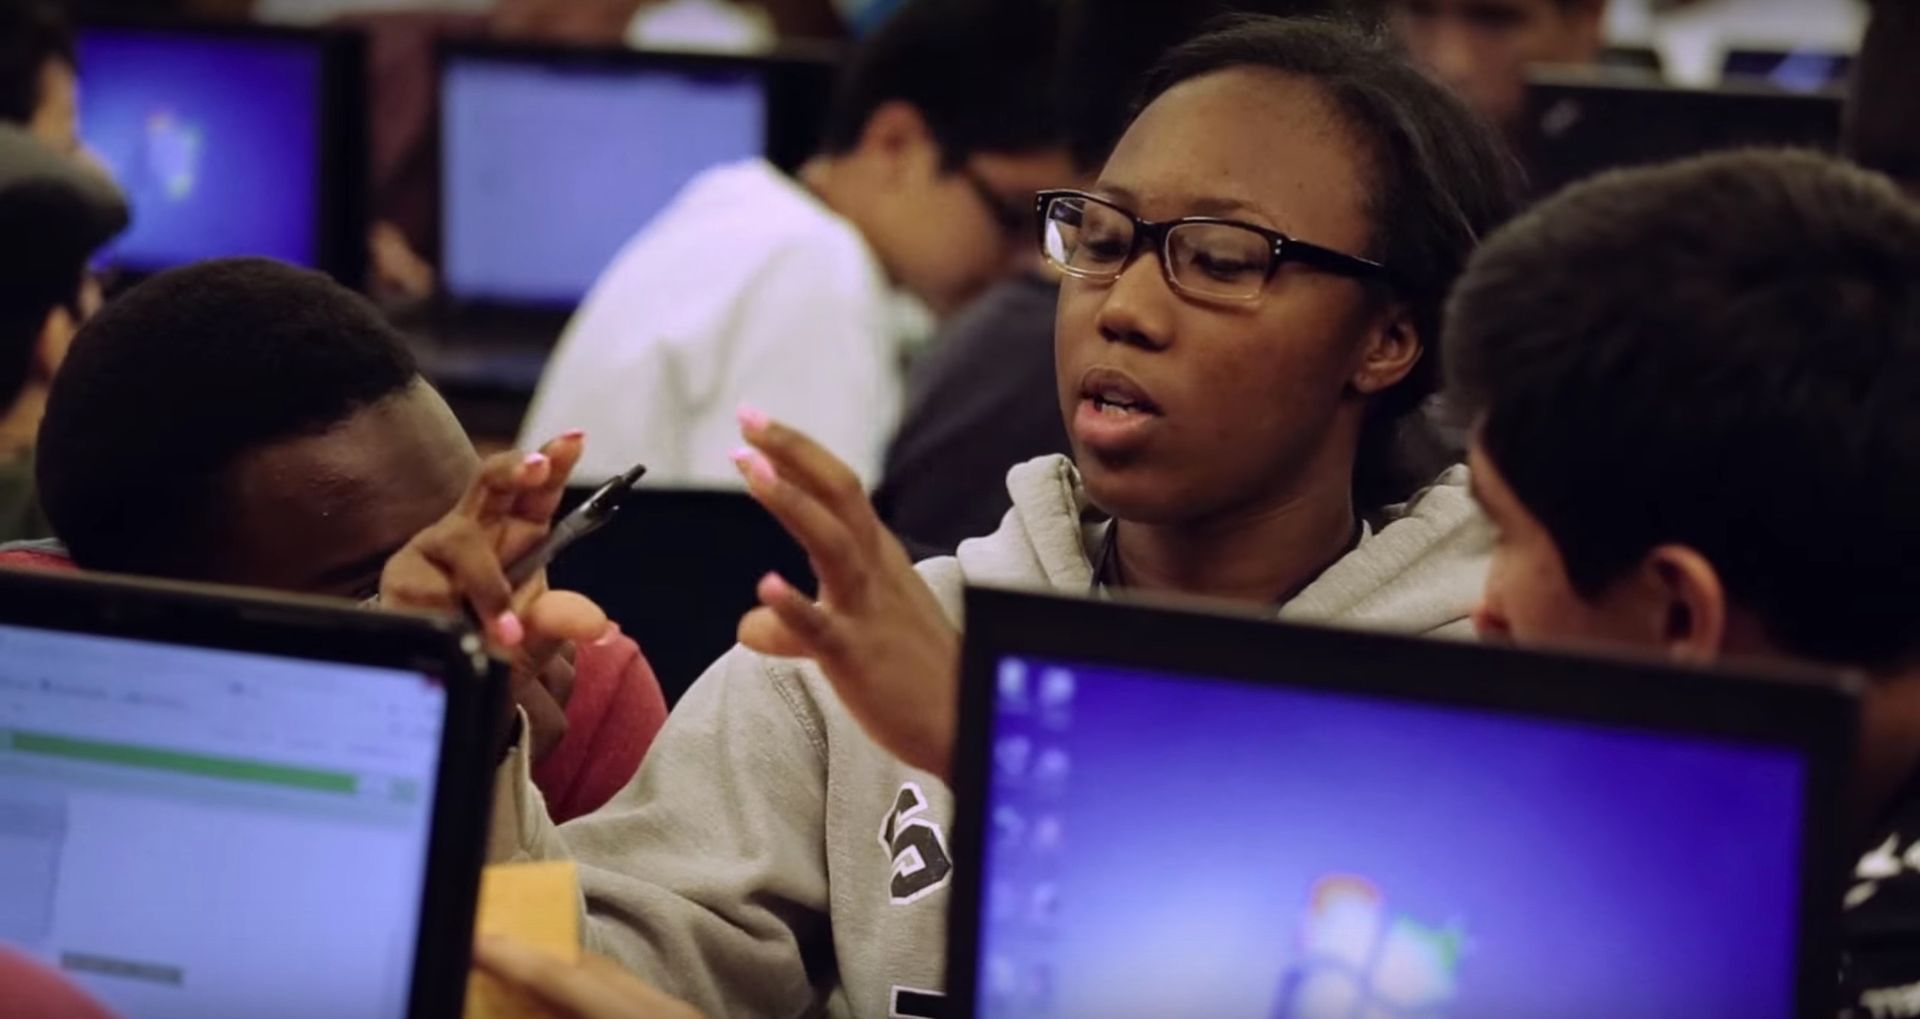 Hackathons are just one way will.i.am's i.am Foundation gets kids excited about STEM